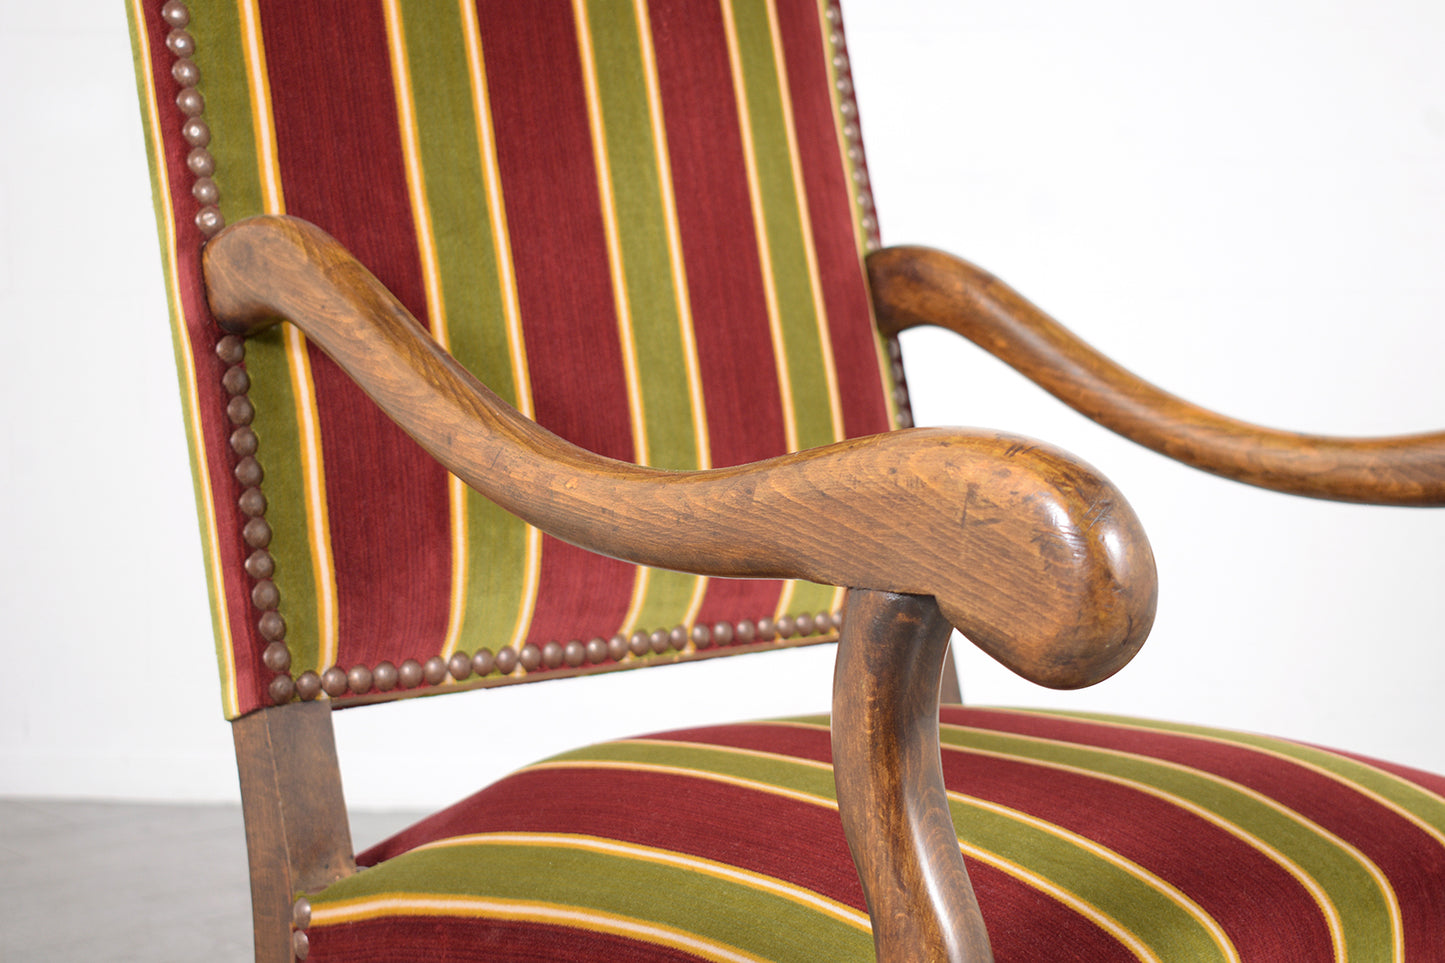 19th Century French Armchairs: Dark Walnut Finish with Striped Velvet Upholstery